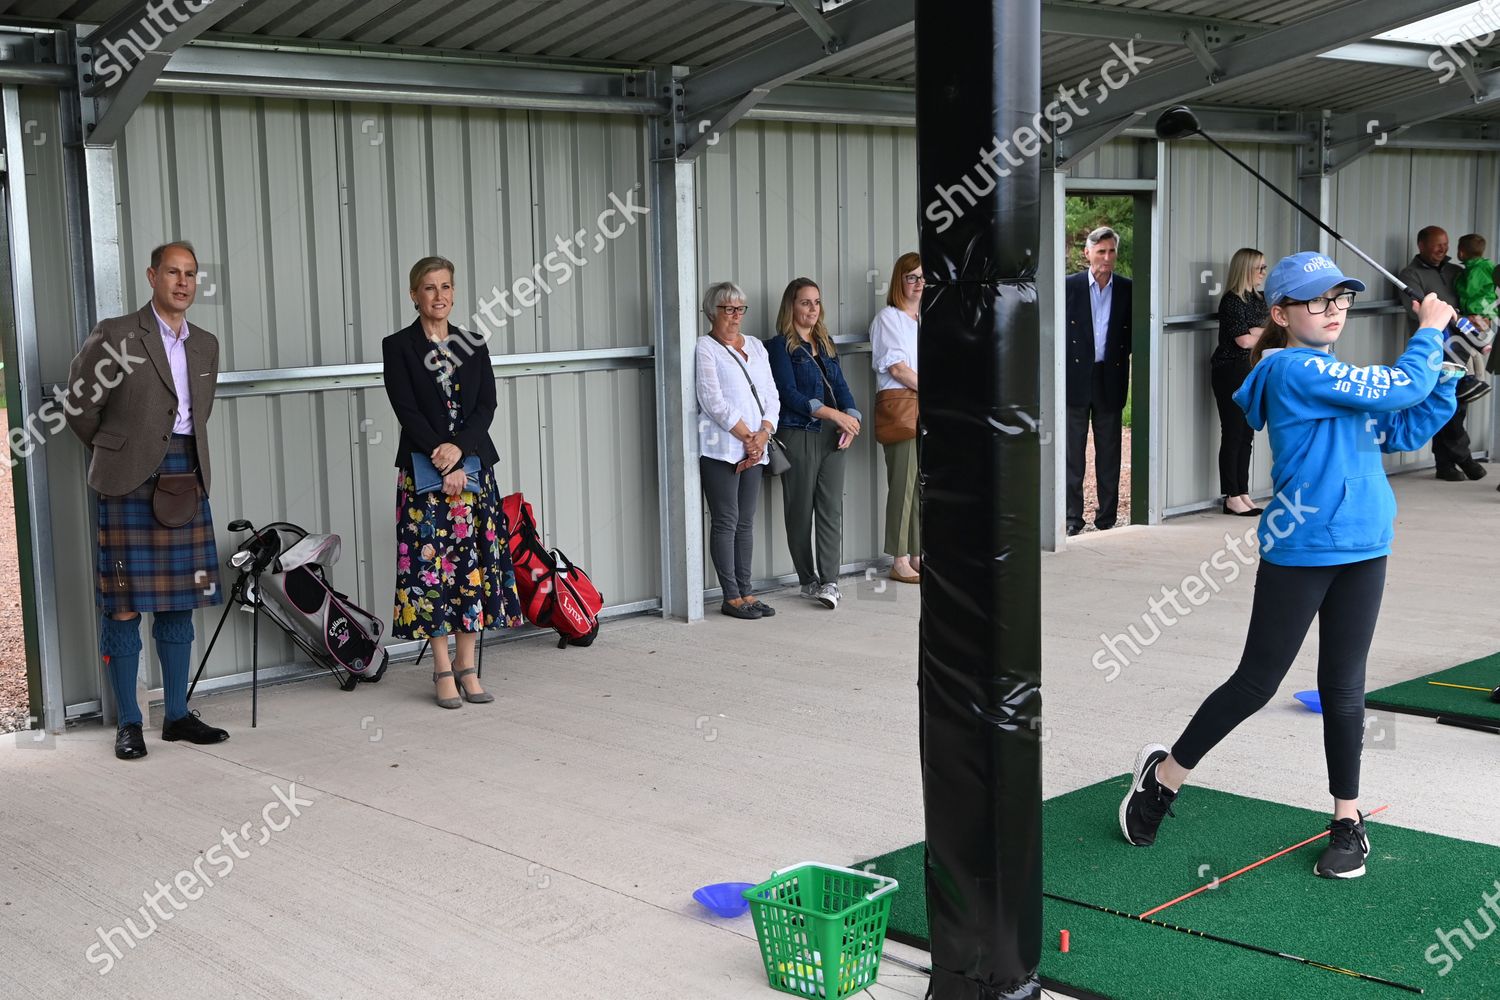 CASA REAL BRITÁNICA - Página 76 Prince-edward-and-sophie-countess-of-wessex-visit-to-forfar-golf-club-scotland-uk-shutterstock-editorial-12172307ax